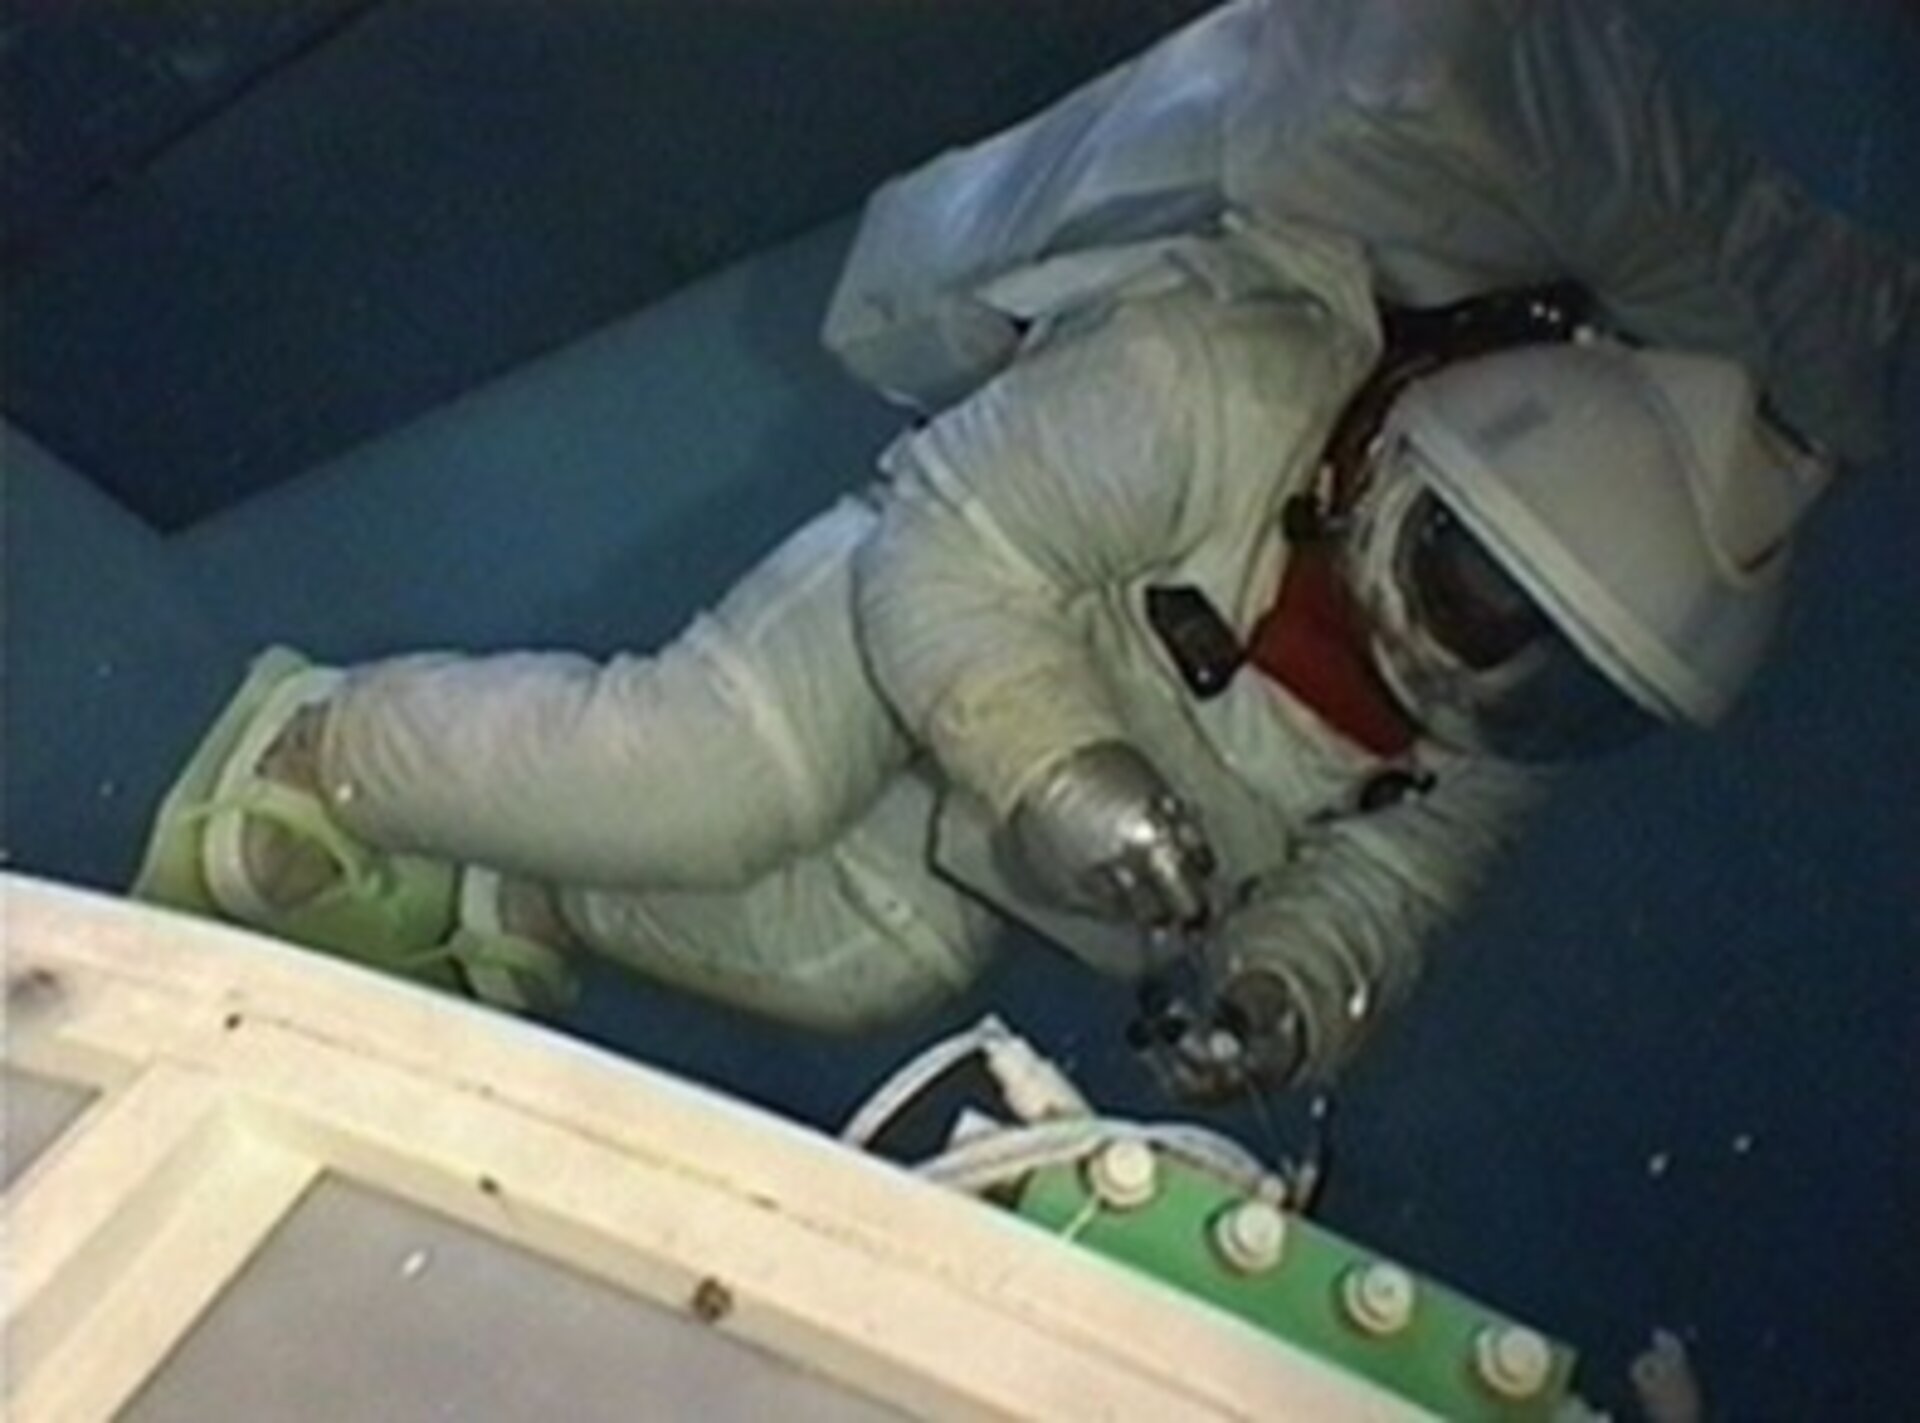 Neutral Buoyancy allows simulation of weightlessness conditions.